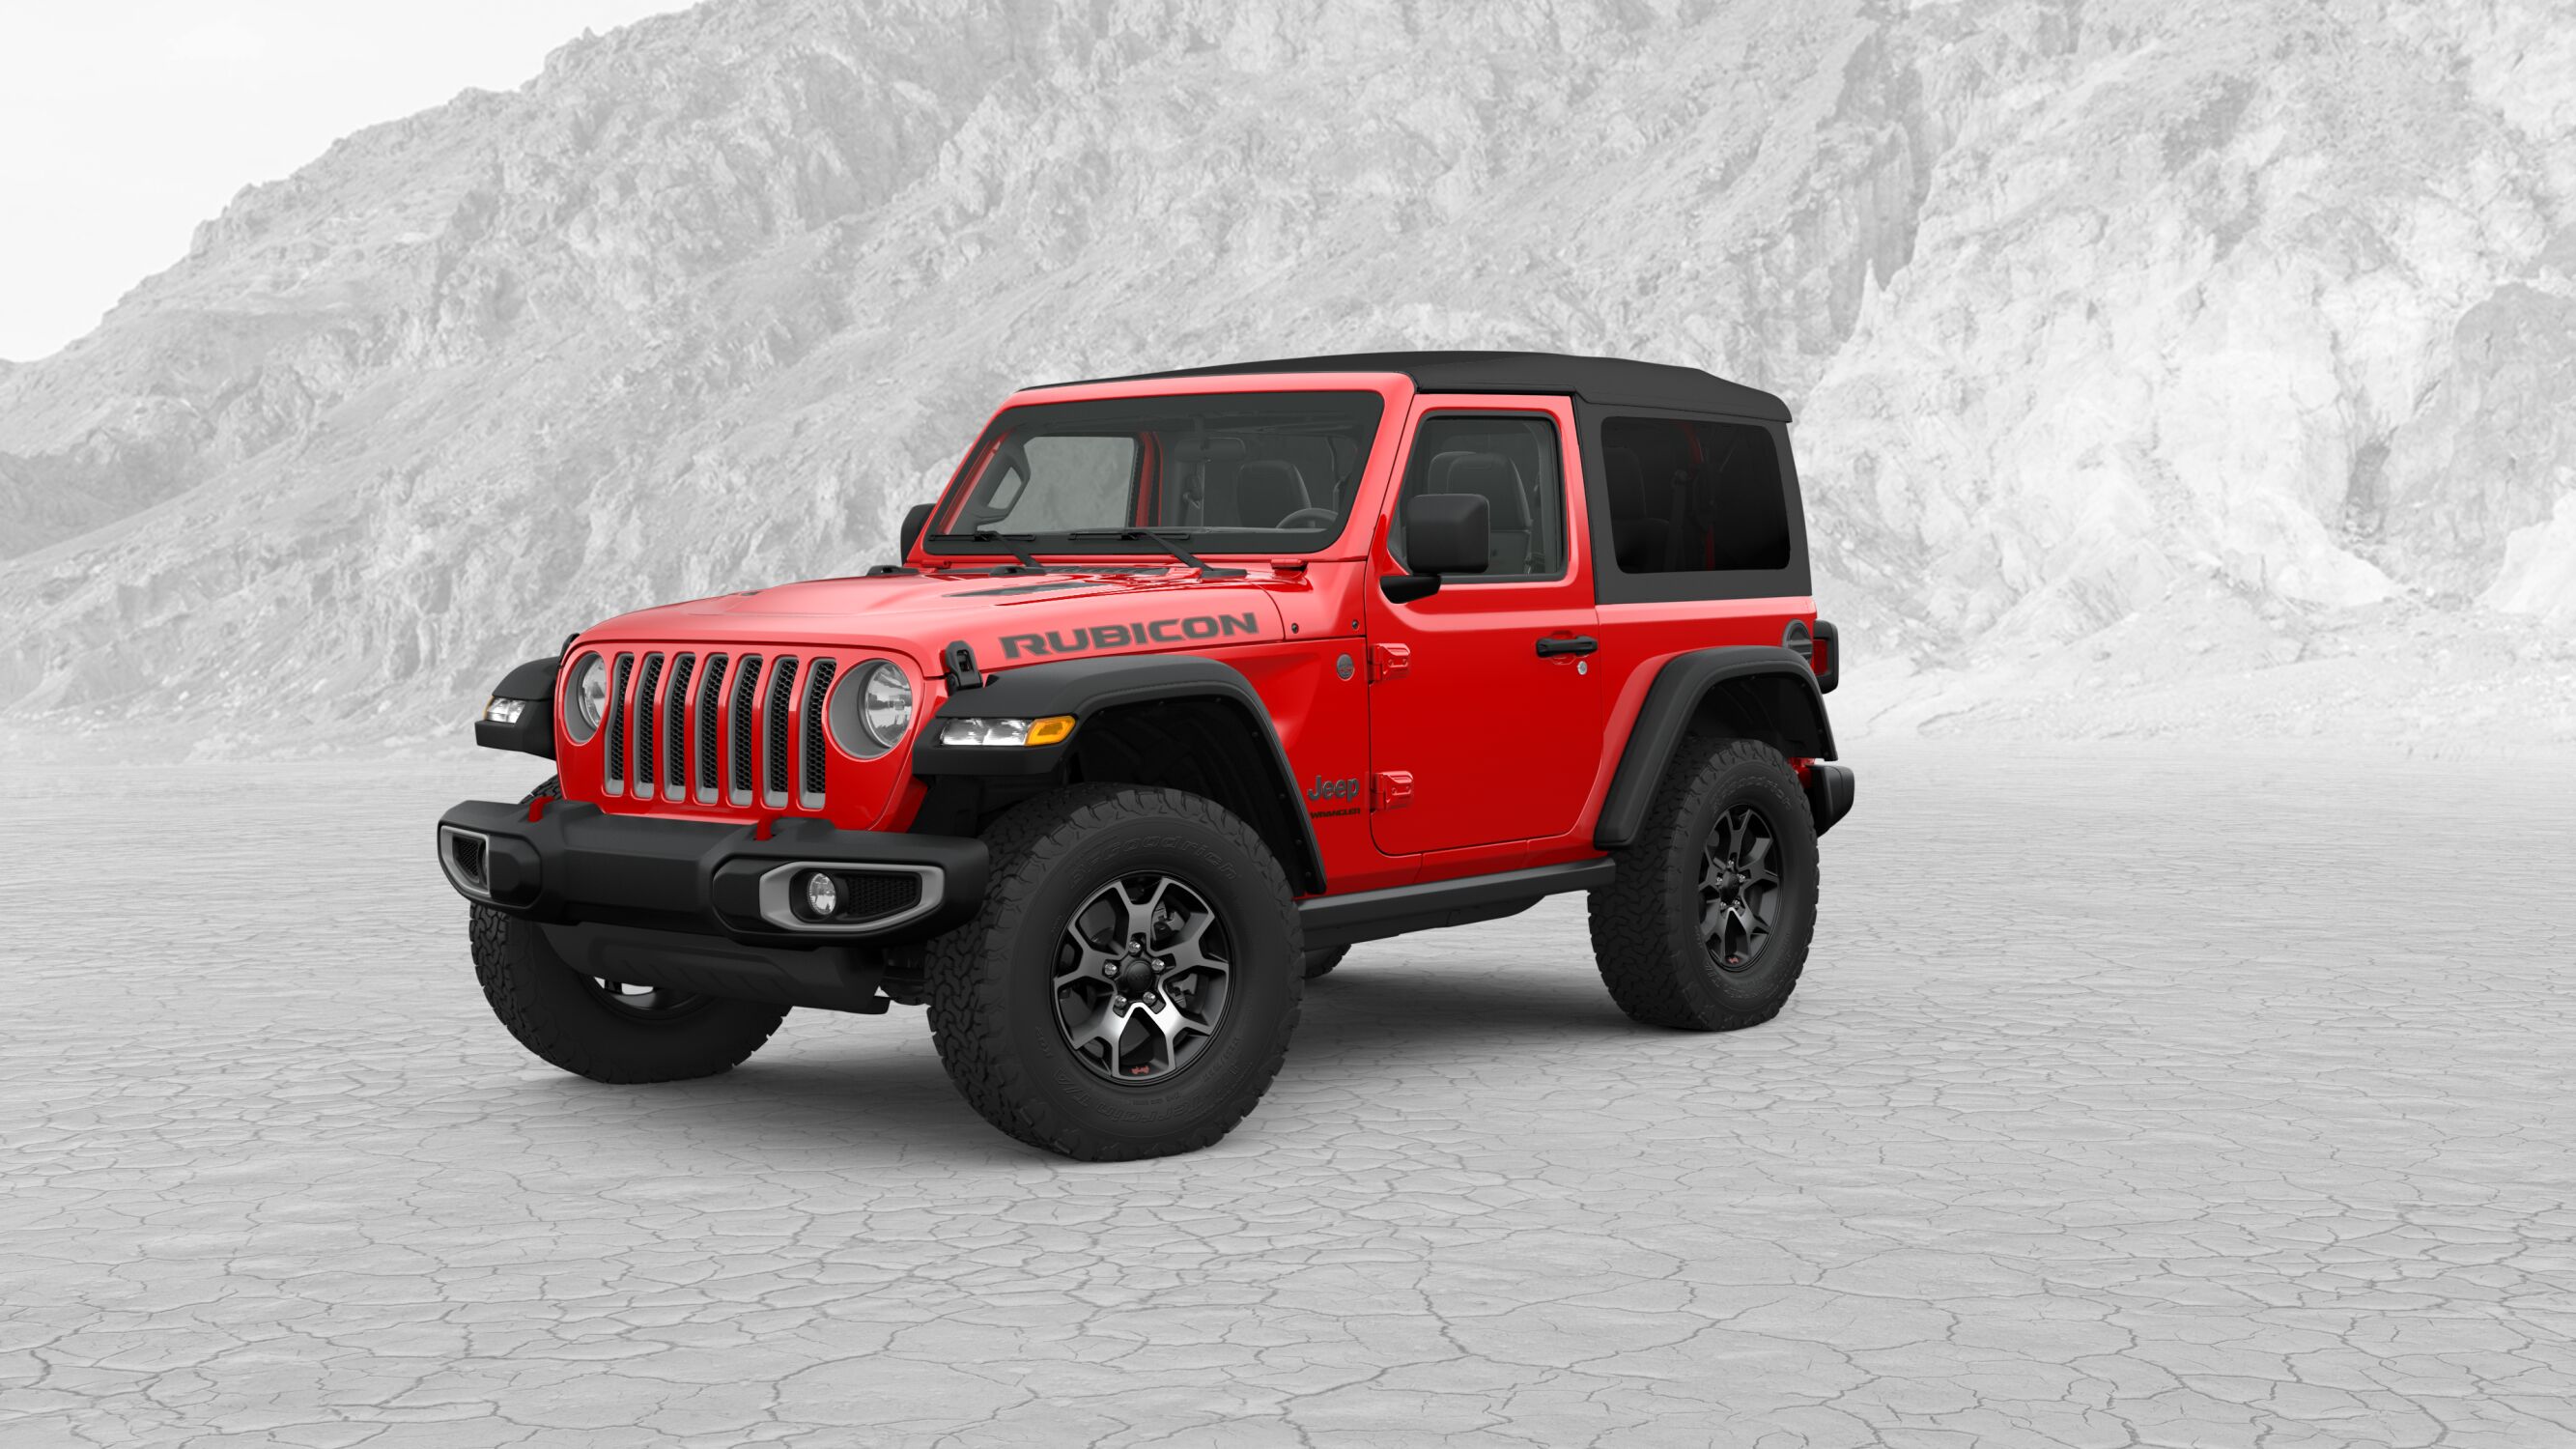 2019 Jeep Wrangler Rubicon Red Exterior Front View Picture